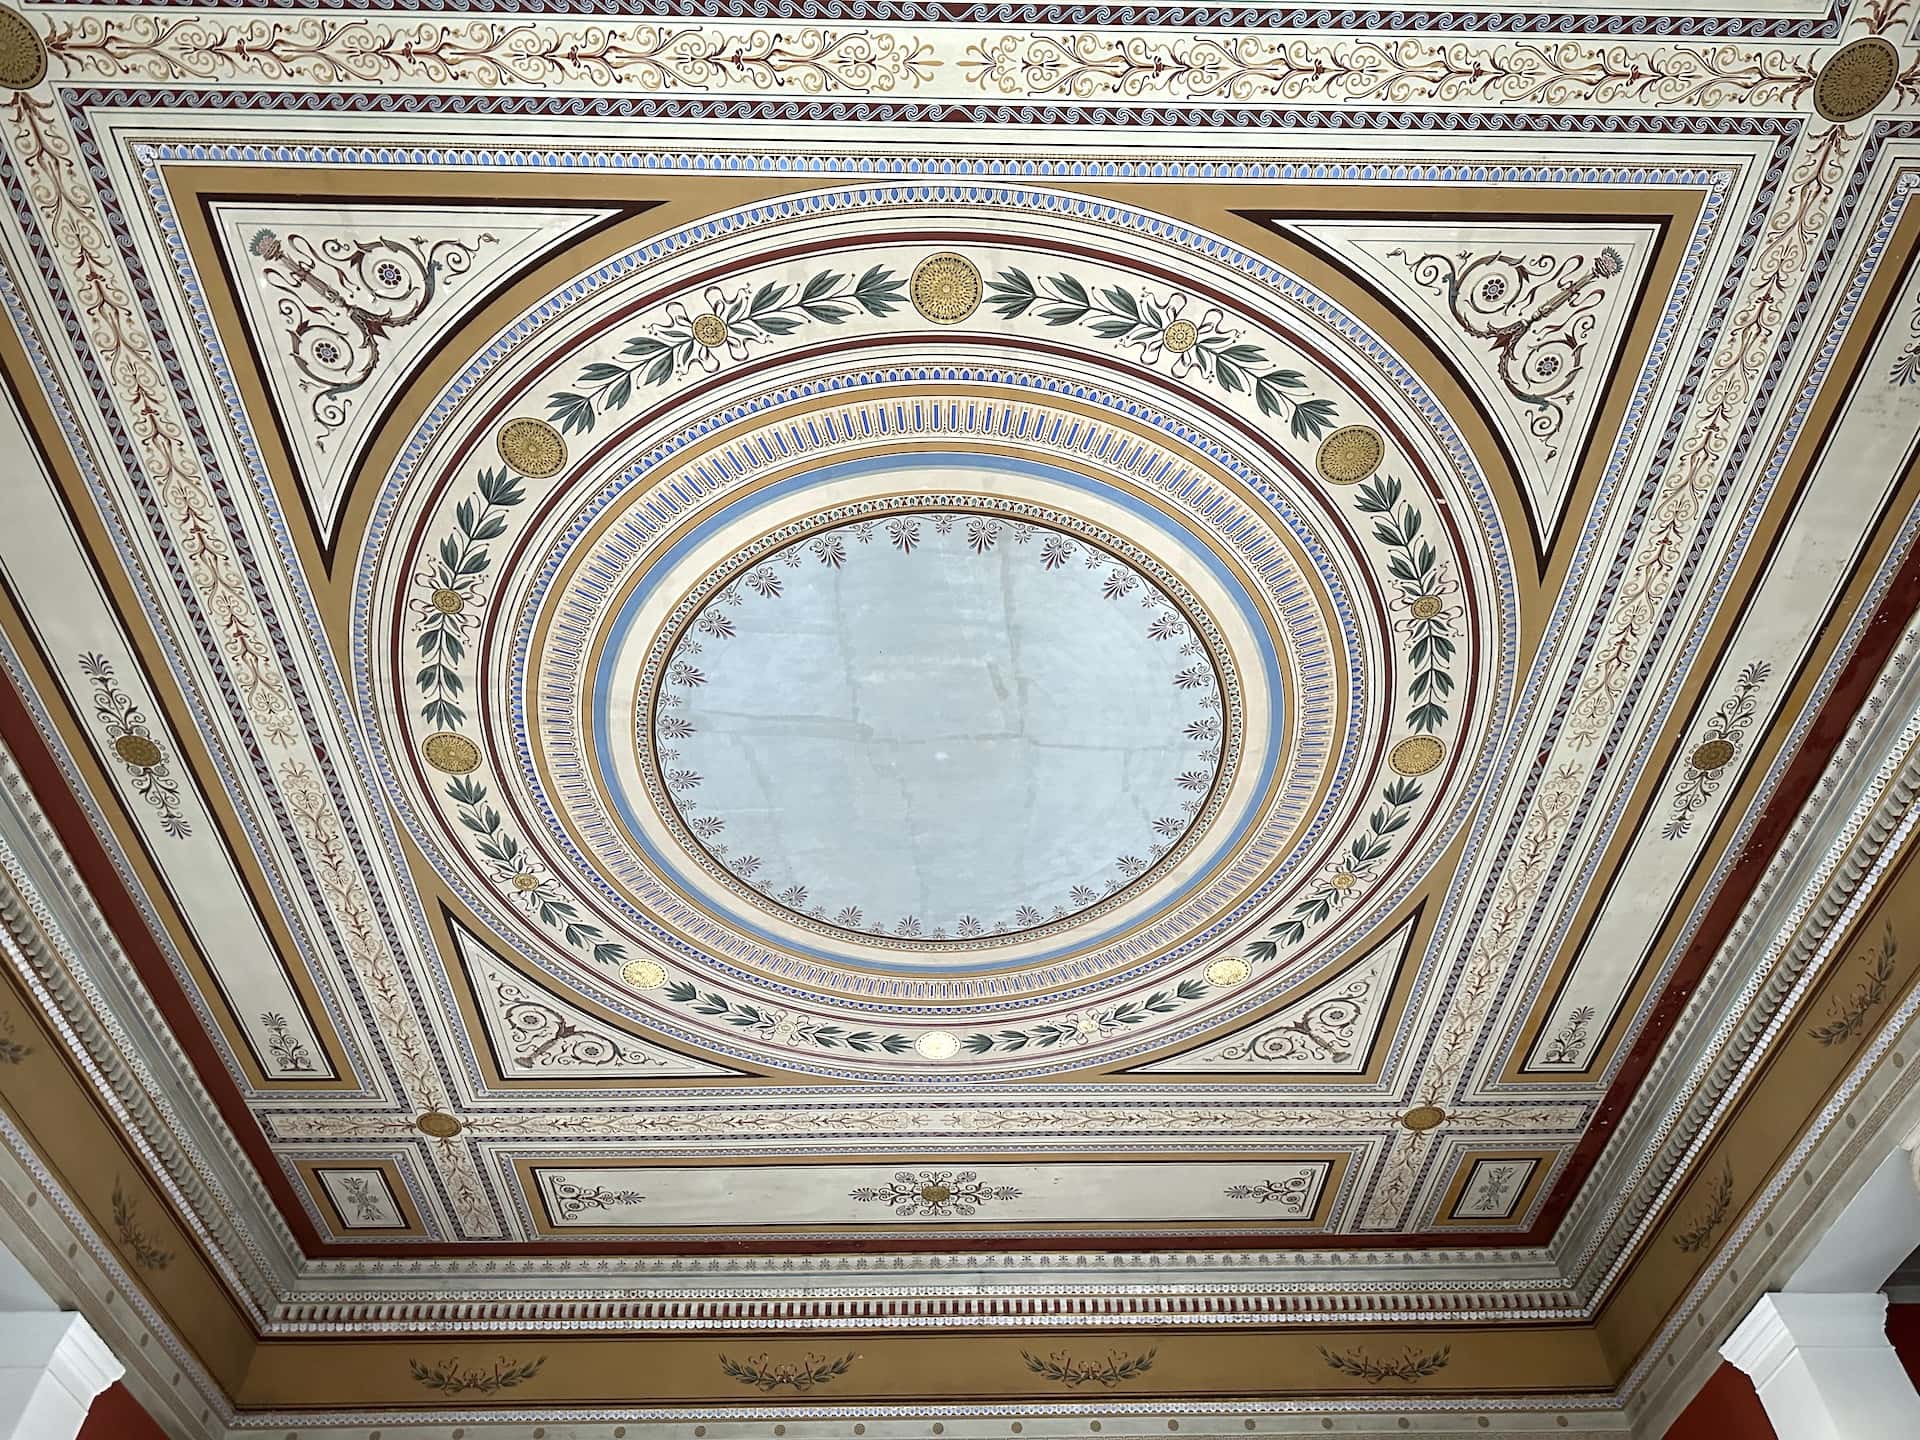 Ceiling of the main foyer